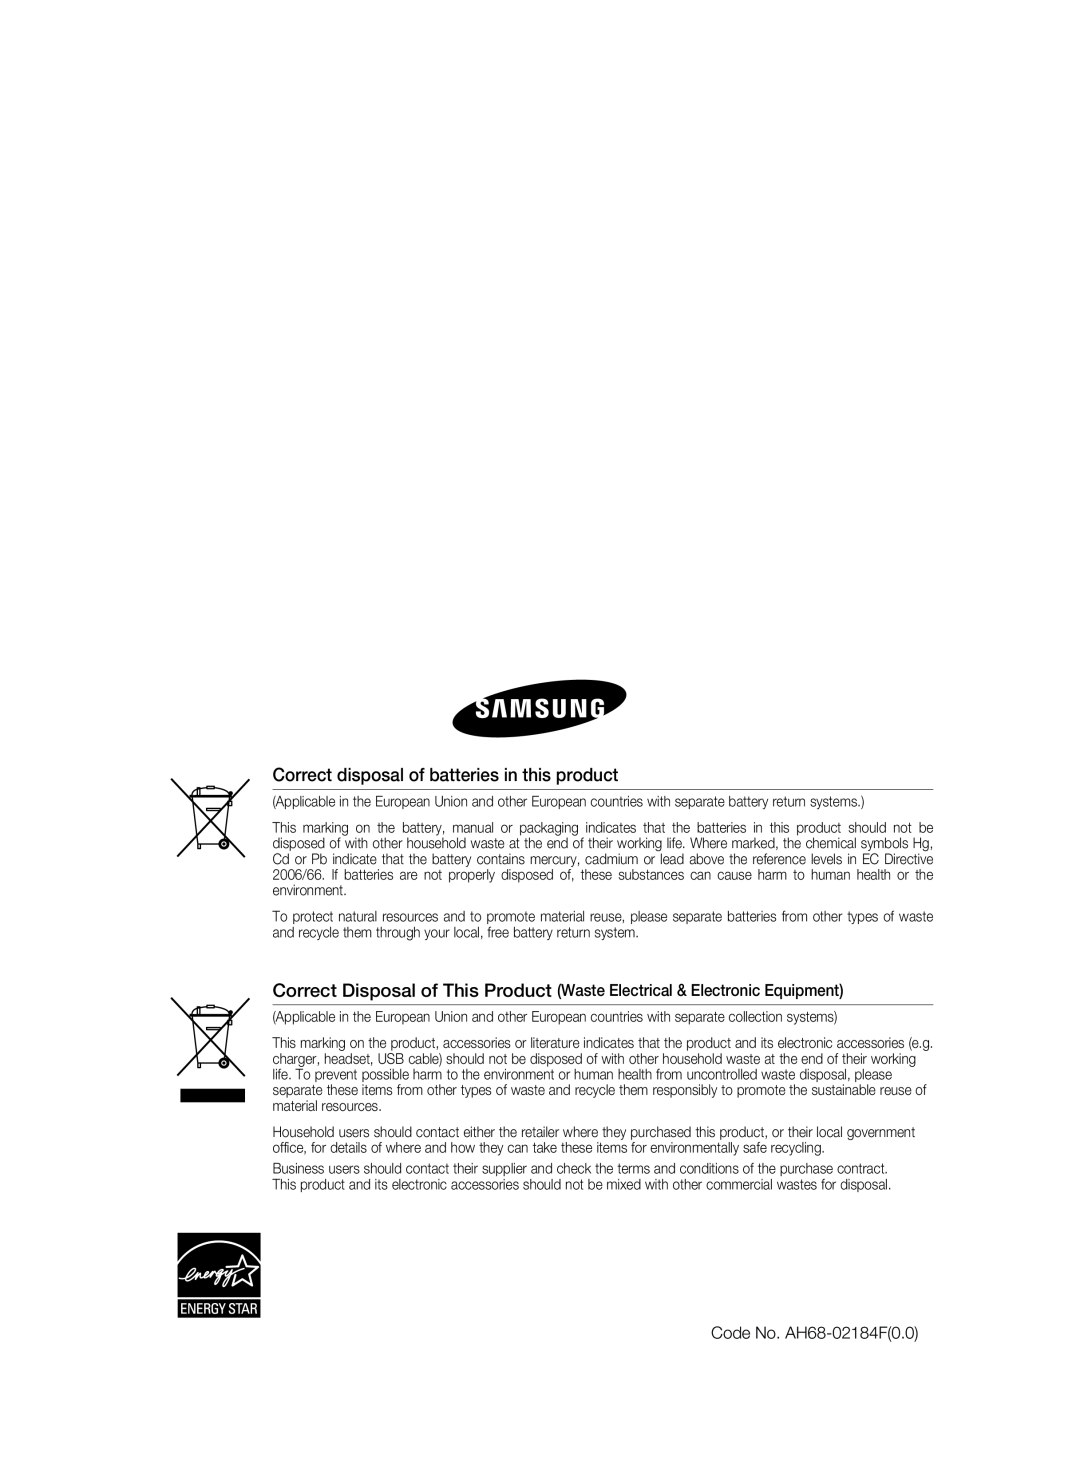 Samsung user manual Correct disposal of batteries in this product, Code No. AH68-02184F0.0 